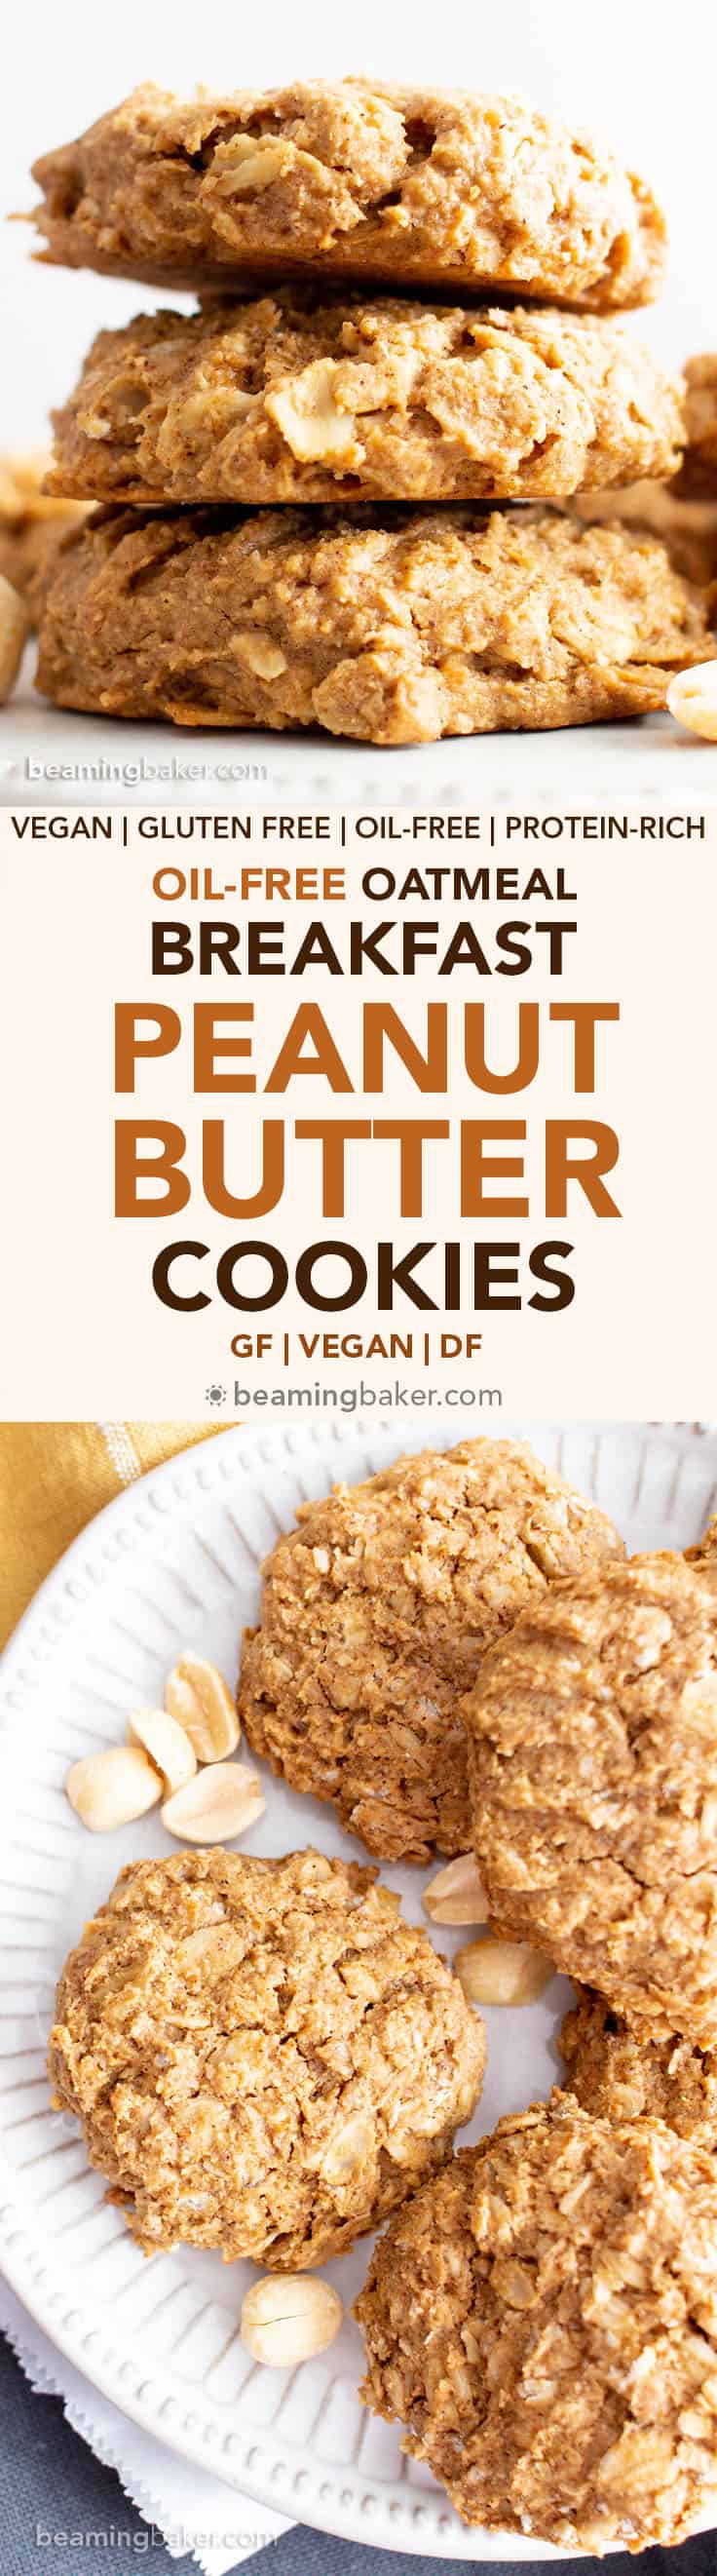 Oil-Free Peanut Butter Oatmeal Breakfast Cookies (V, GF): chewy ‘n healthy breakfast cookies bursting with peanut butter flavor and packed with nutritious ingredients! #Vegan #GlutenFree #BreakfastCookies #BeamingBaker #GlutenFreeVegan #OilFree #PeanutButter #Oatmeal #VeganCookies | Recipe at BeamingBaker.com